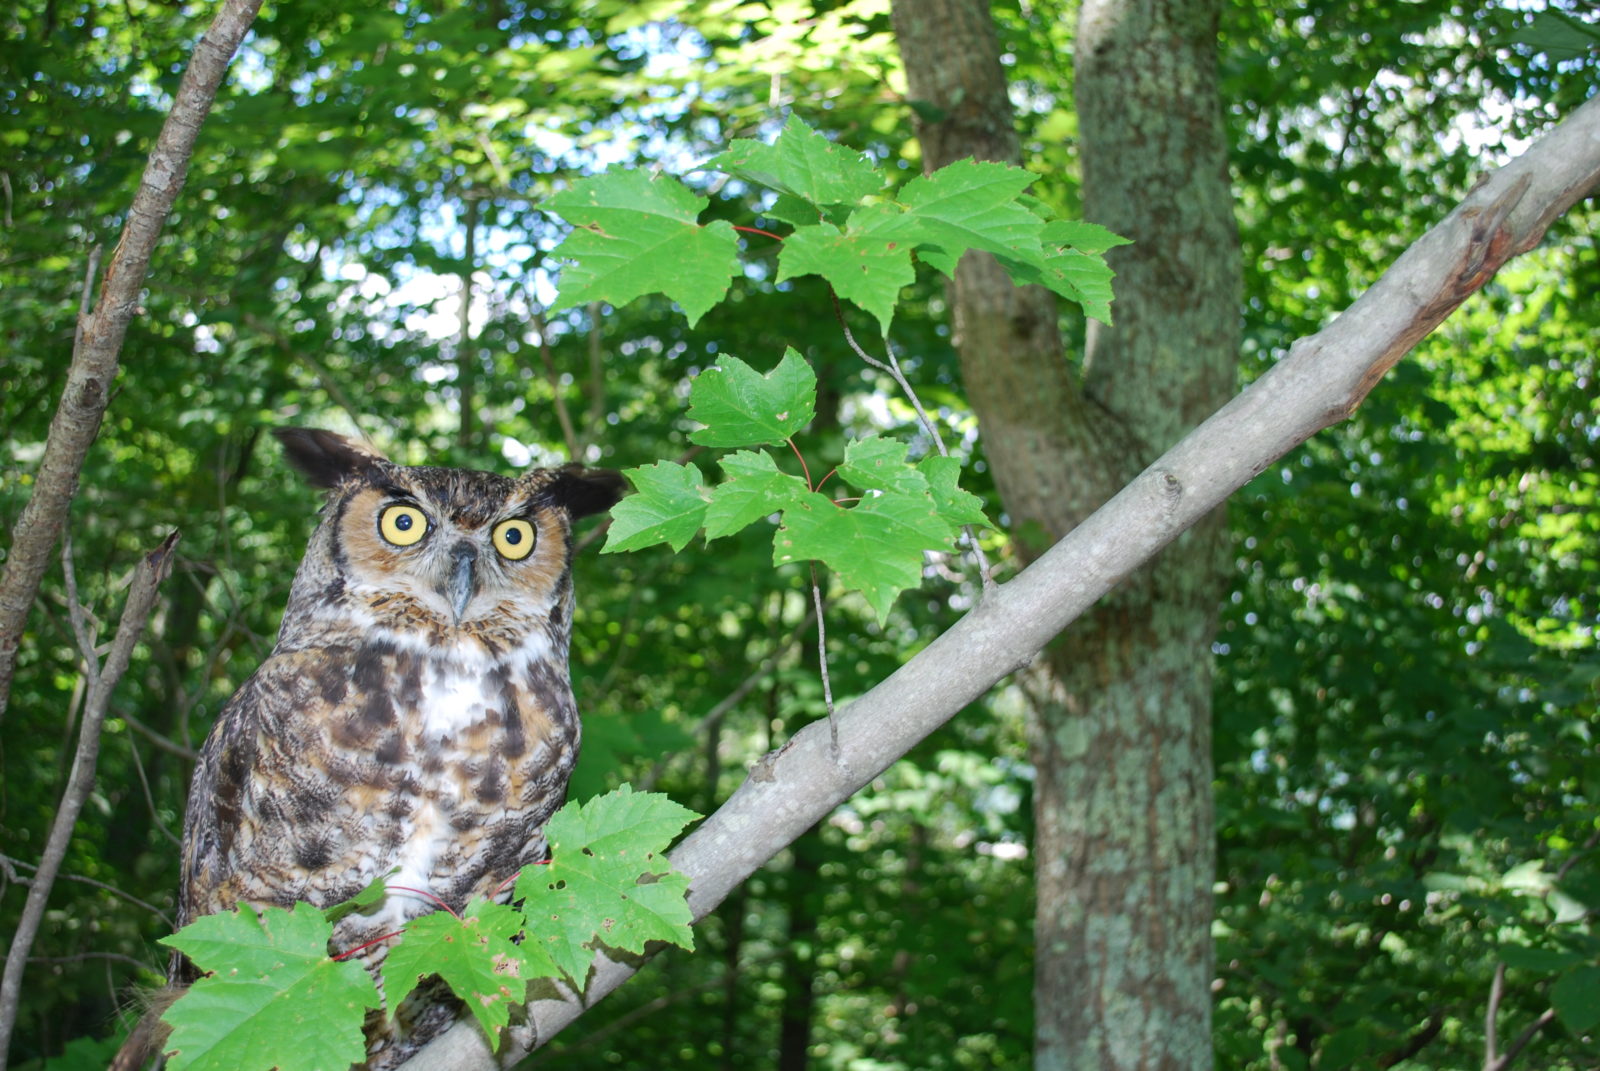 An image of a great horned owl sitting on a maple tree branch